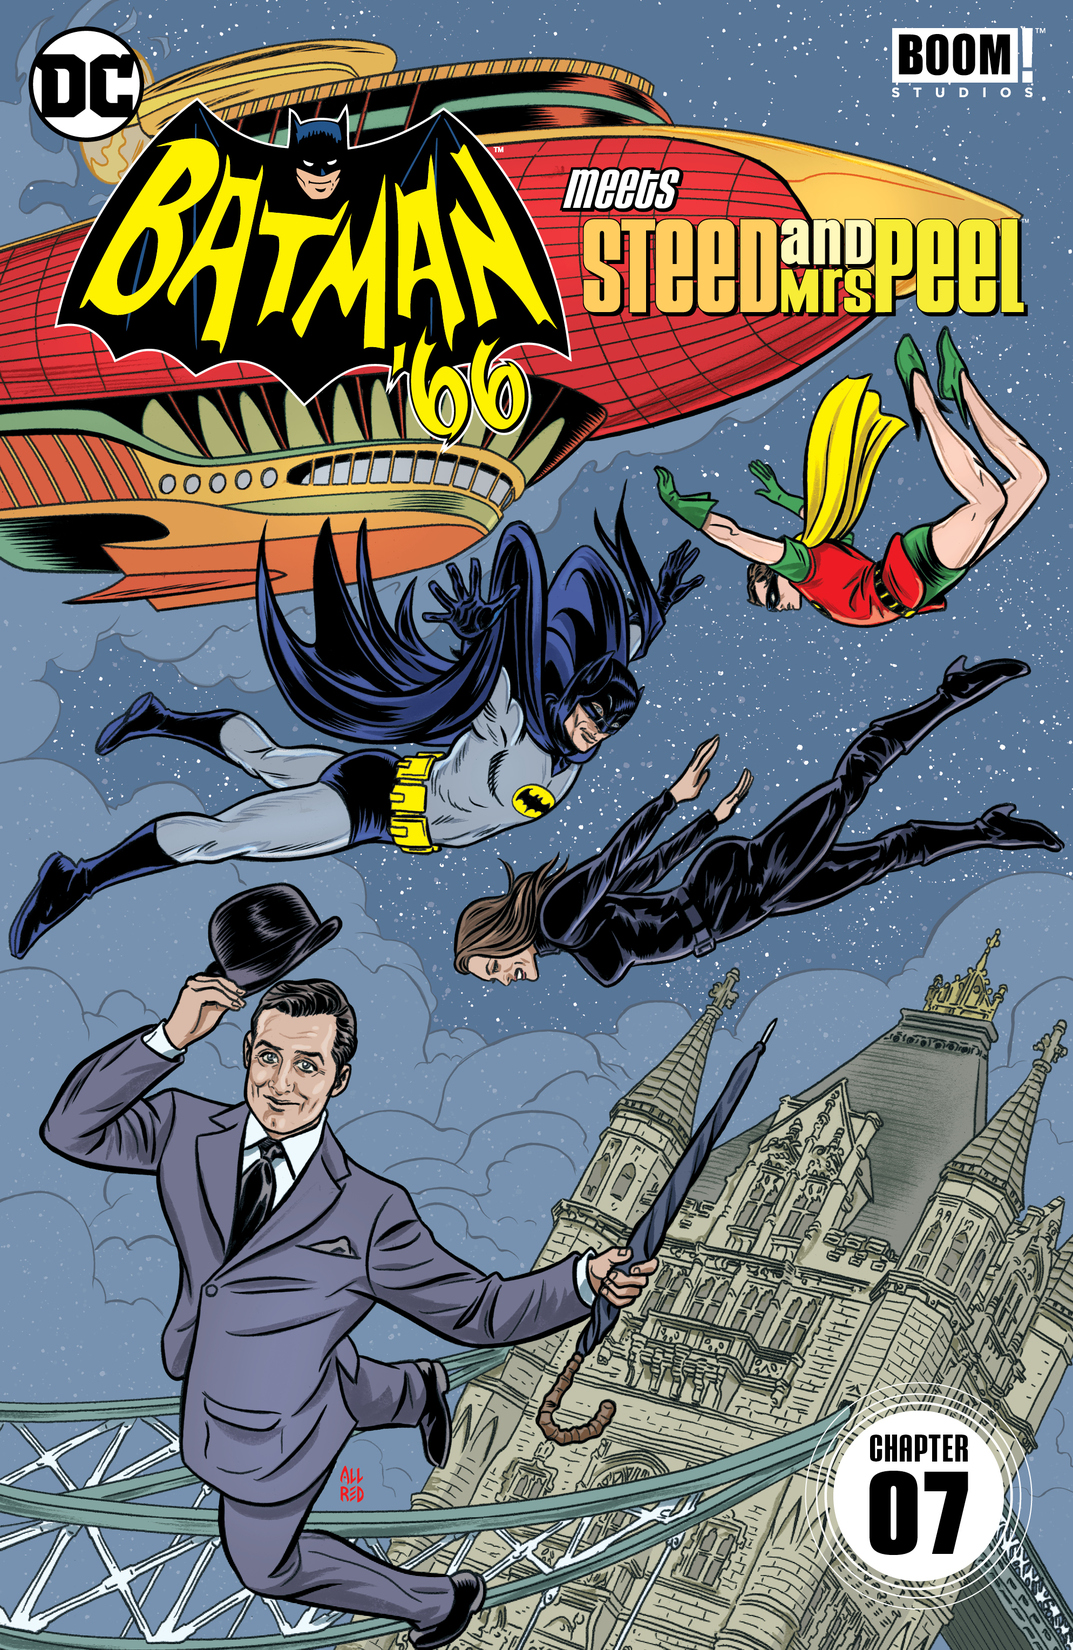 Batman '66 Meets Steed and Mrs Peel #7 preview images